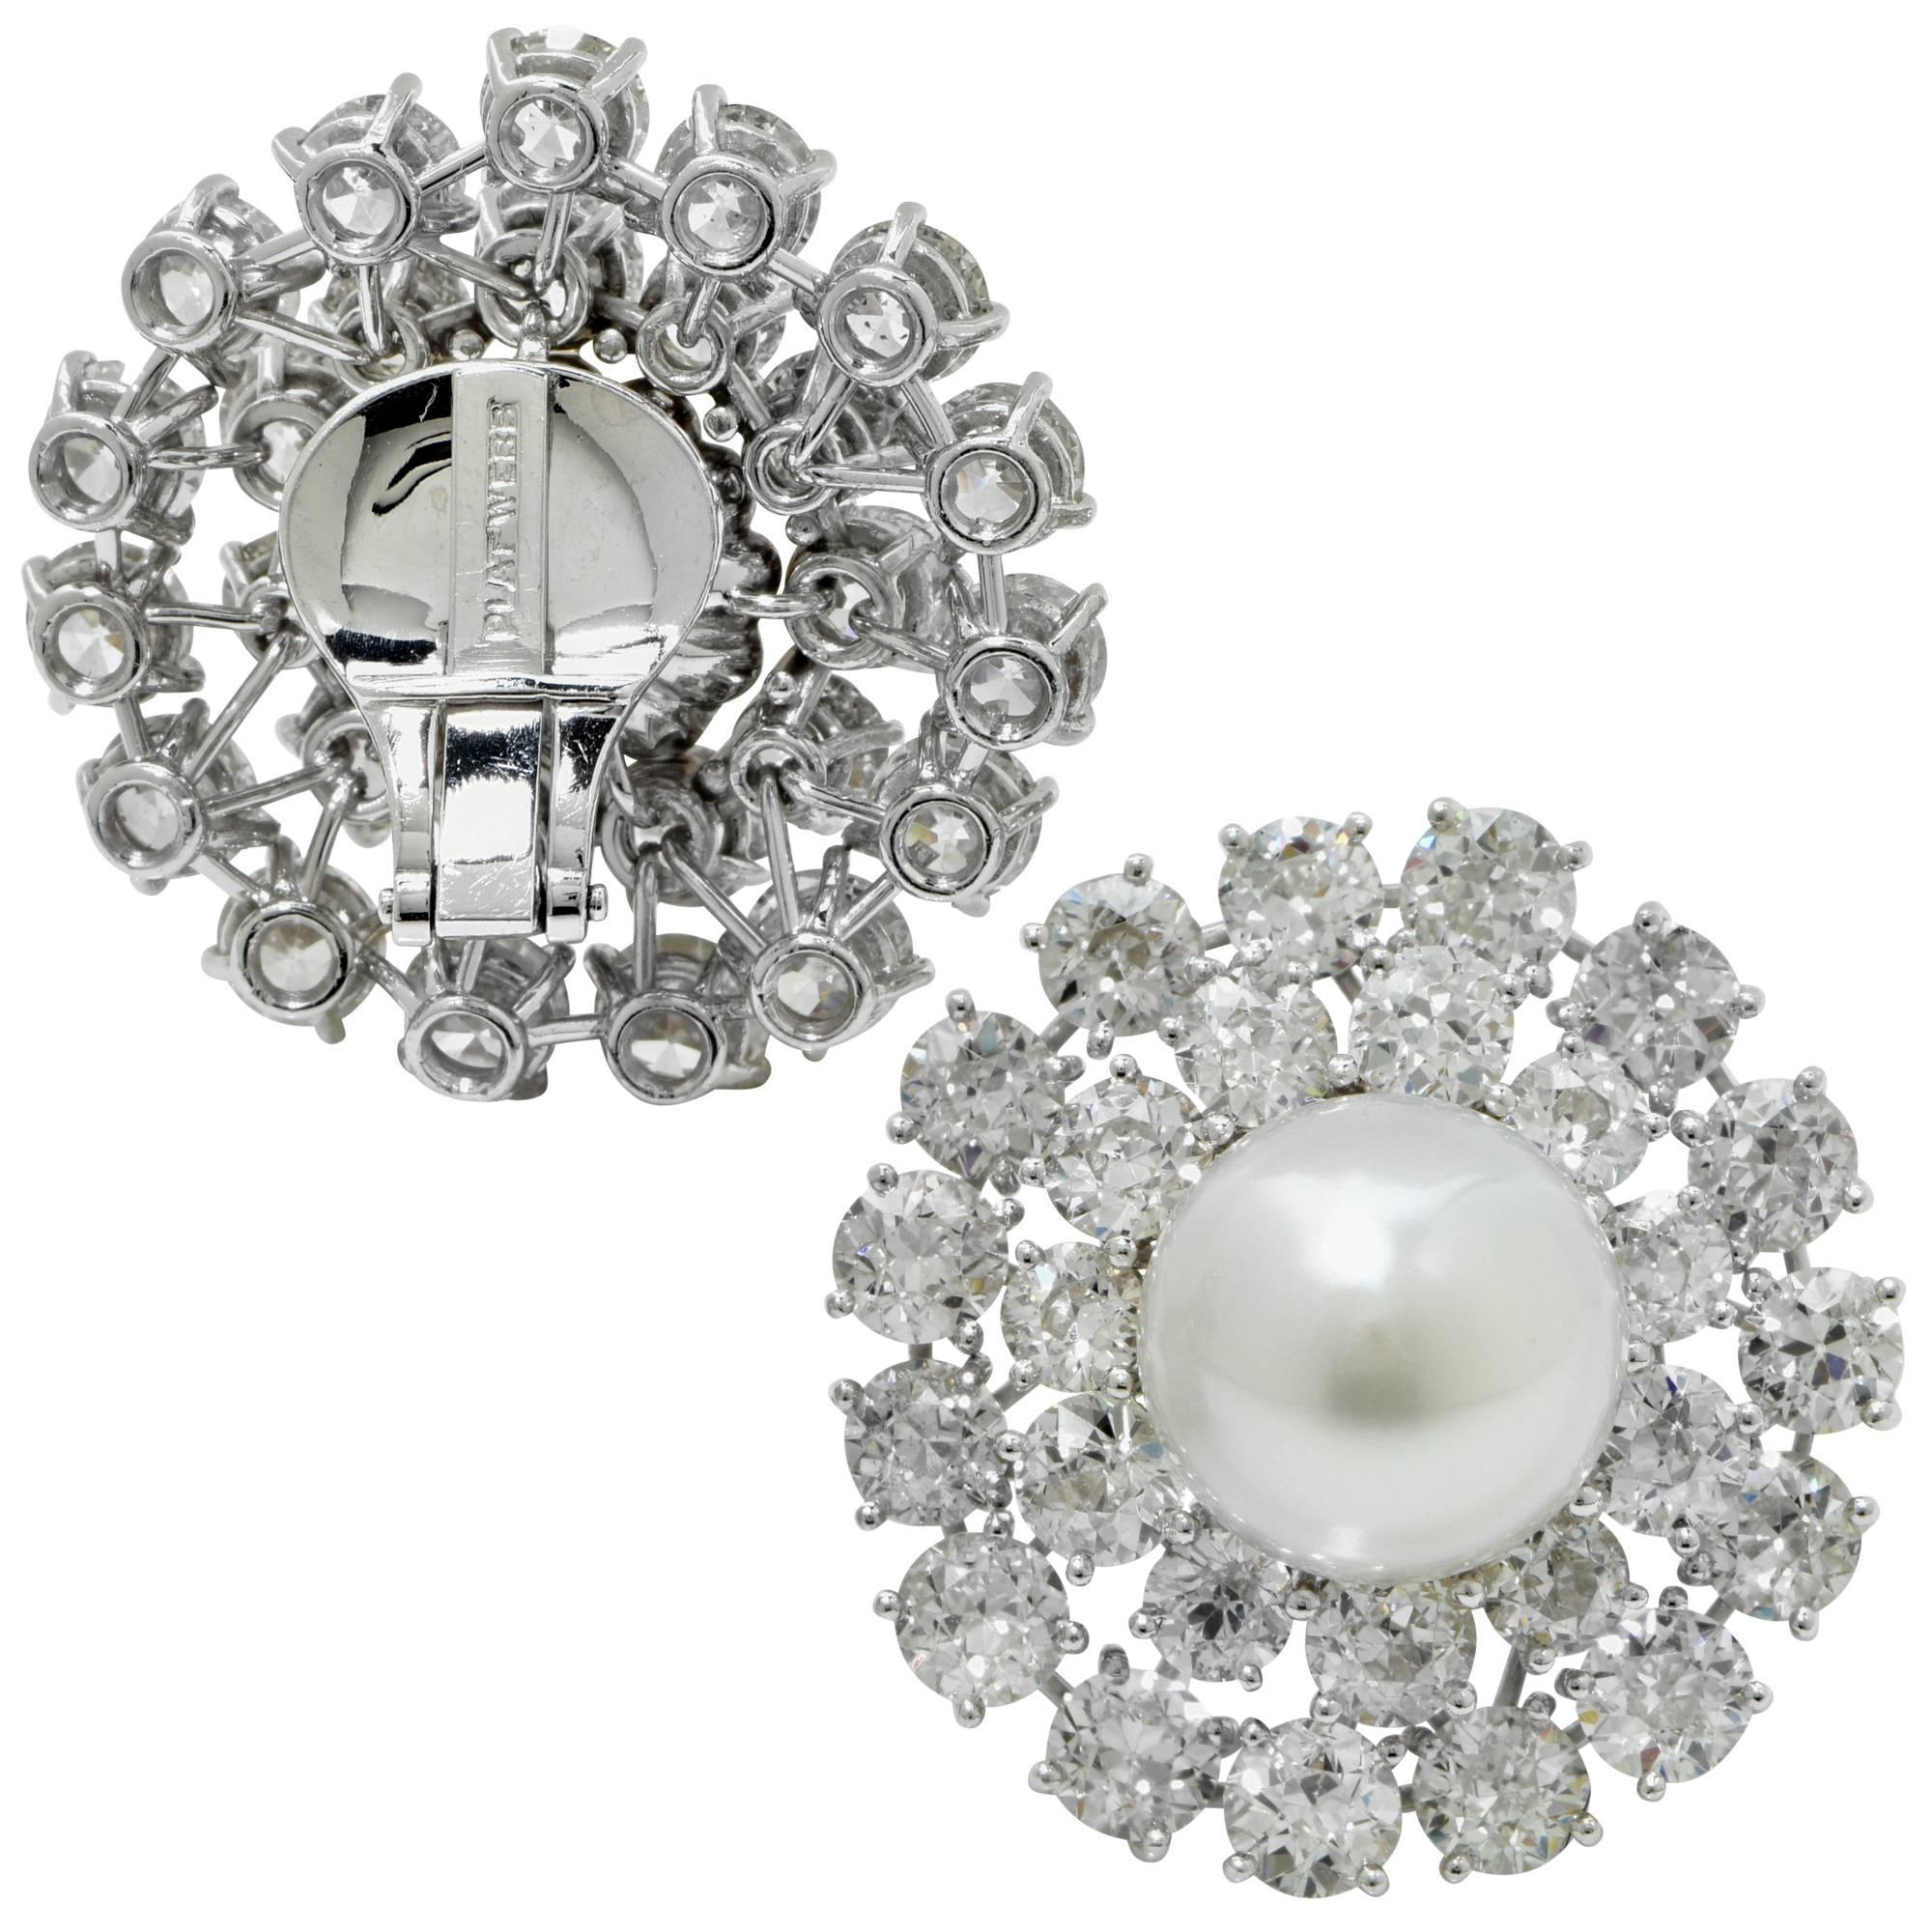 David Webb platinum clip earrings featuring 2 matching pearls surrounded by 52 transitional cut diamonds weighing approximately 20cts.

These earrings measure 1.22 inch in height by 1.18 inch in width by .60 inch in depth (not including clip)
It is